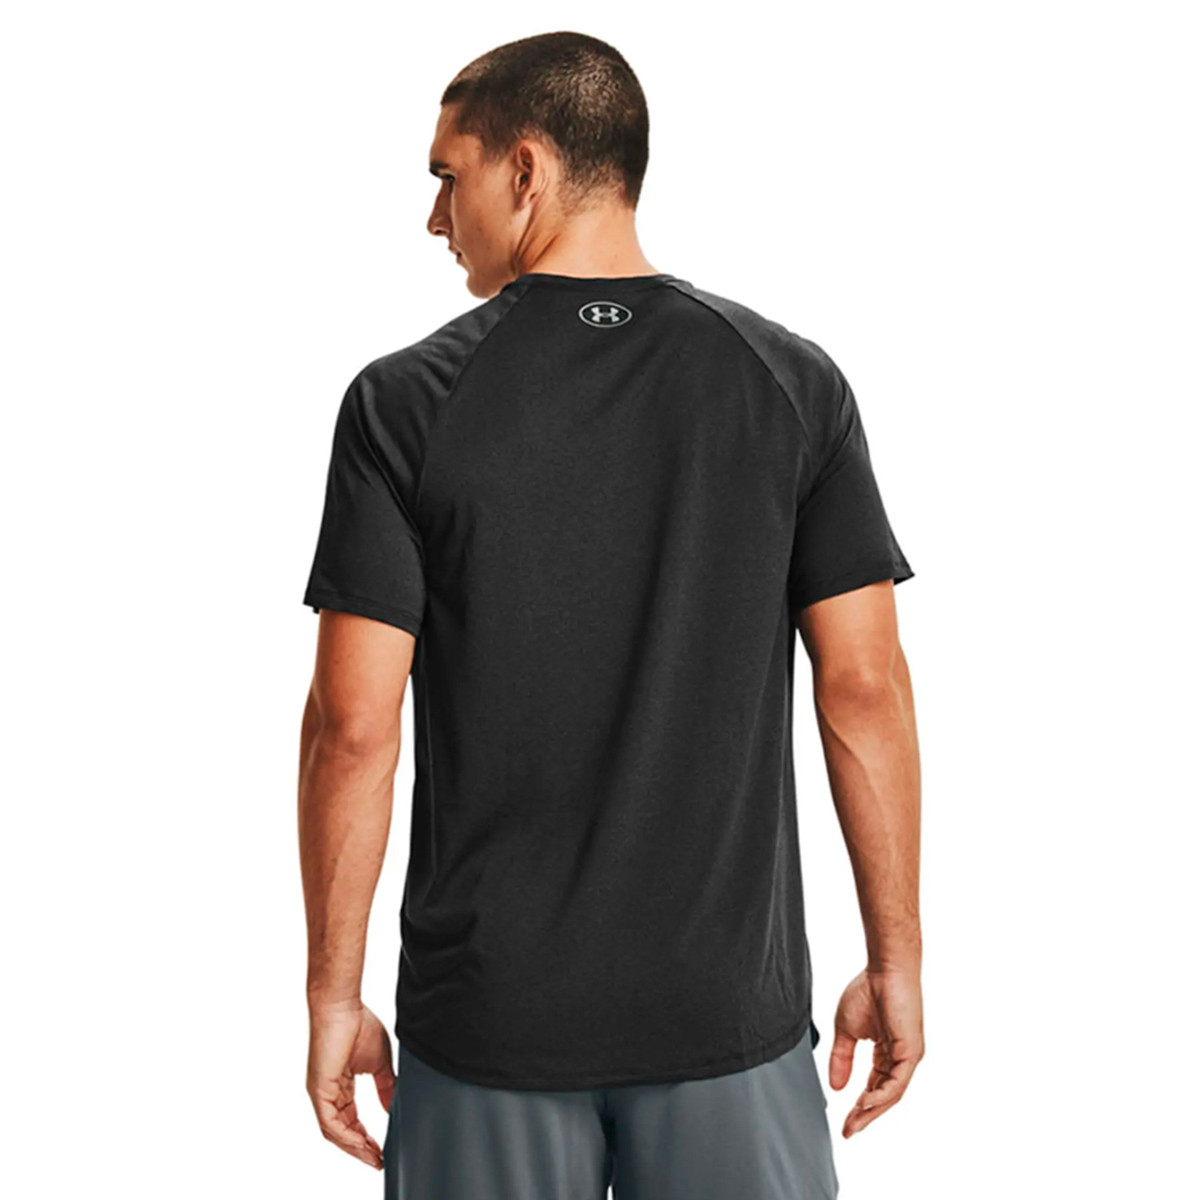 FITNESS TRAINING Under Armour CHARGED COTTON - Camiseta de